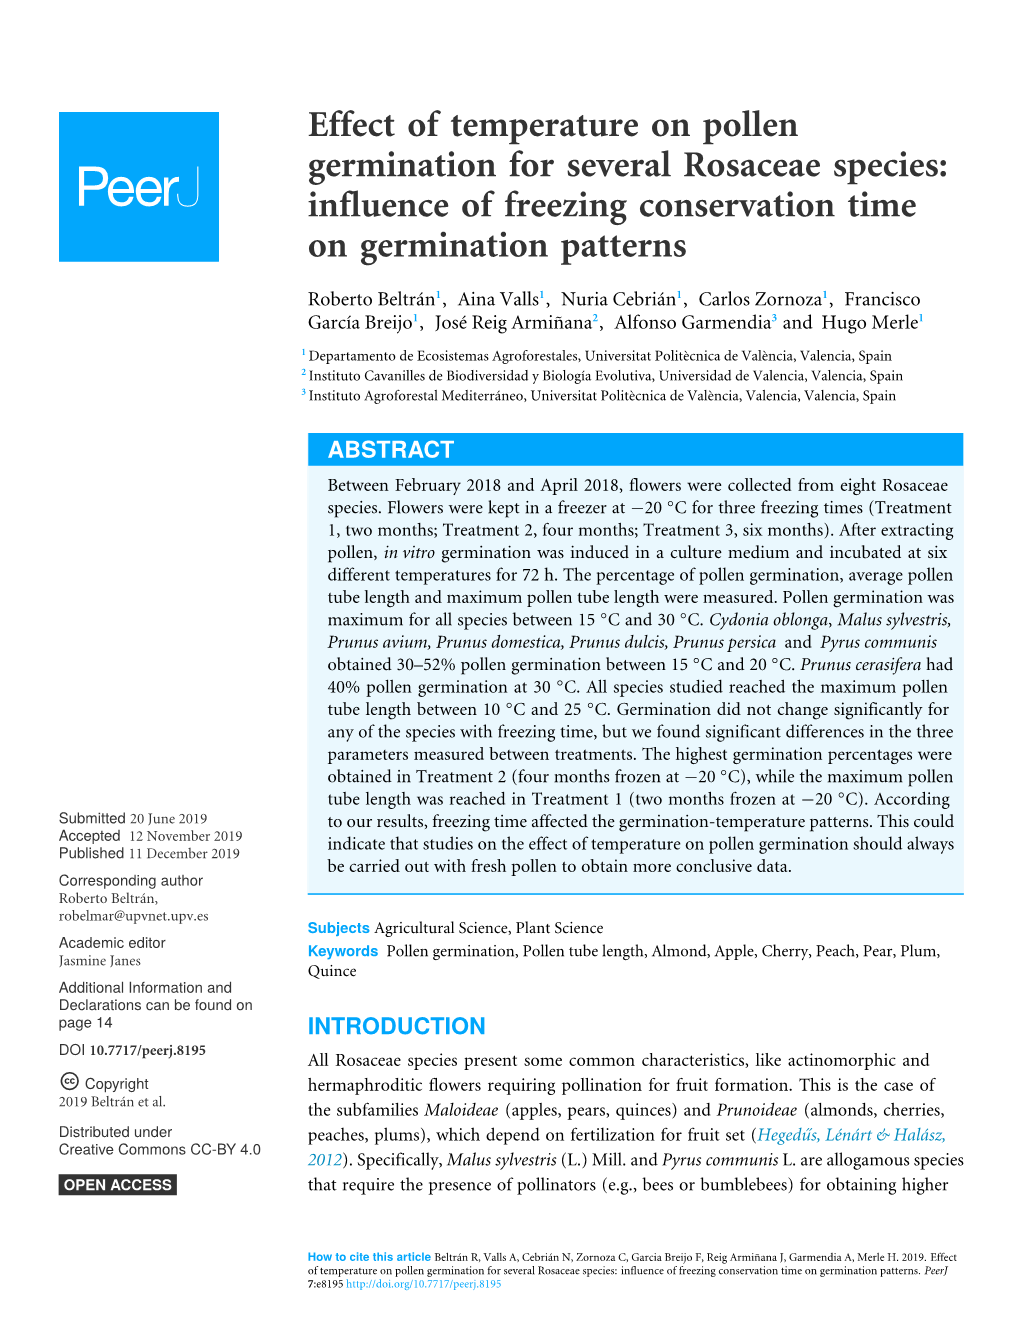 Effect of Temperature on Pollen Germination for Several Rosaceae Species: Influence of Freezing Conservation Time on Germination Patterns